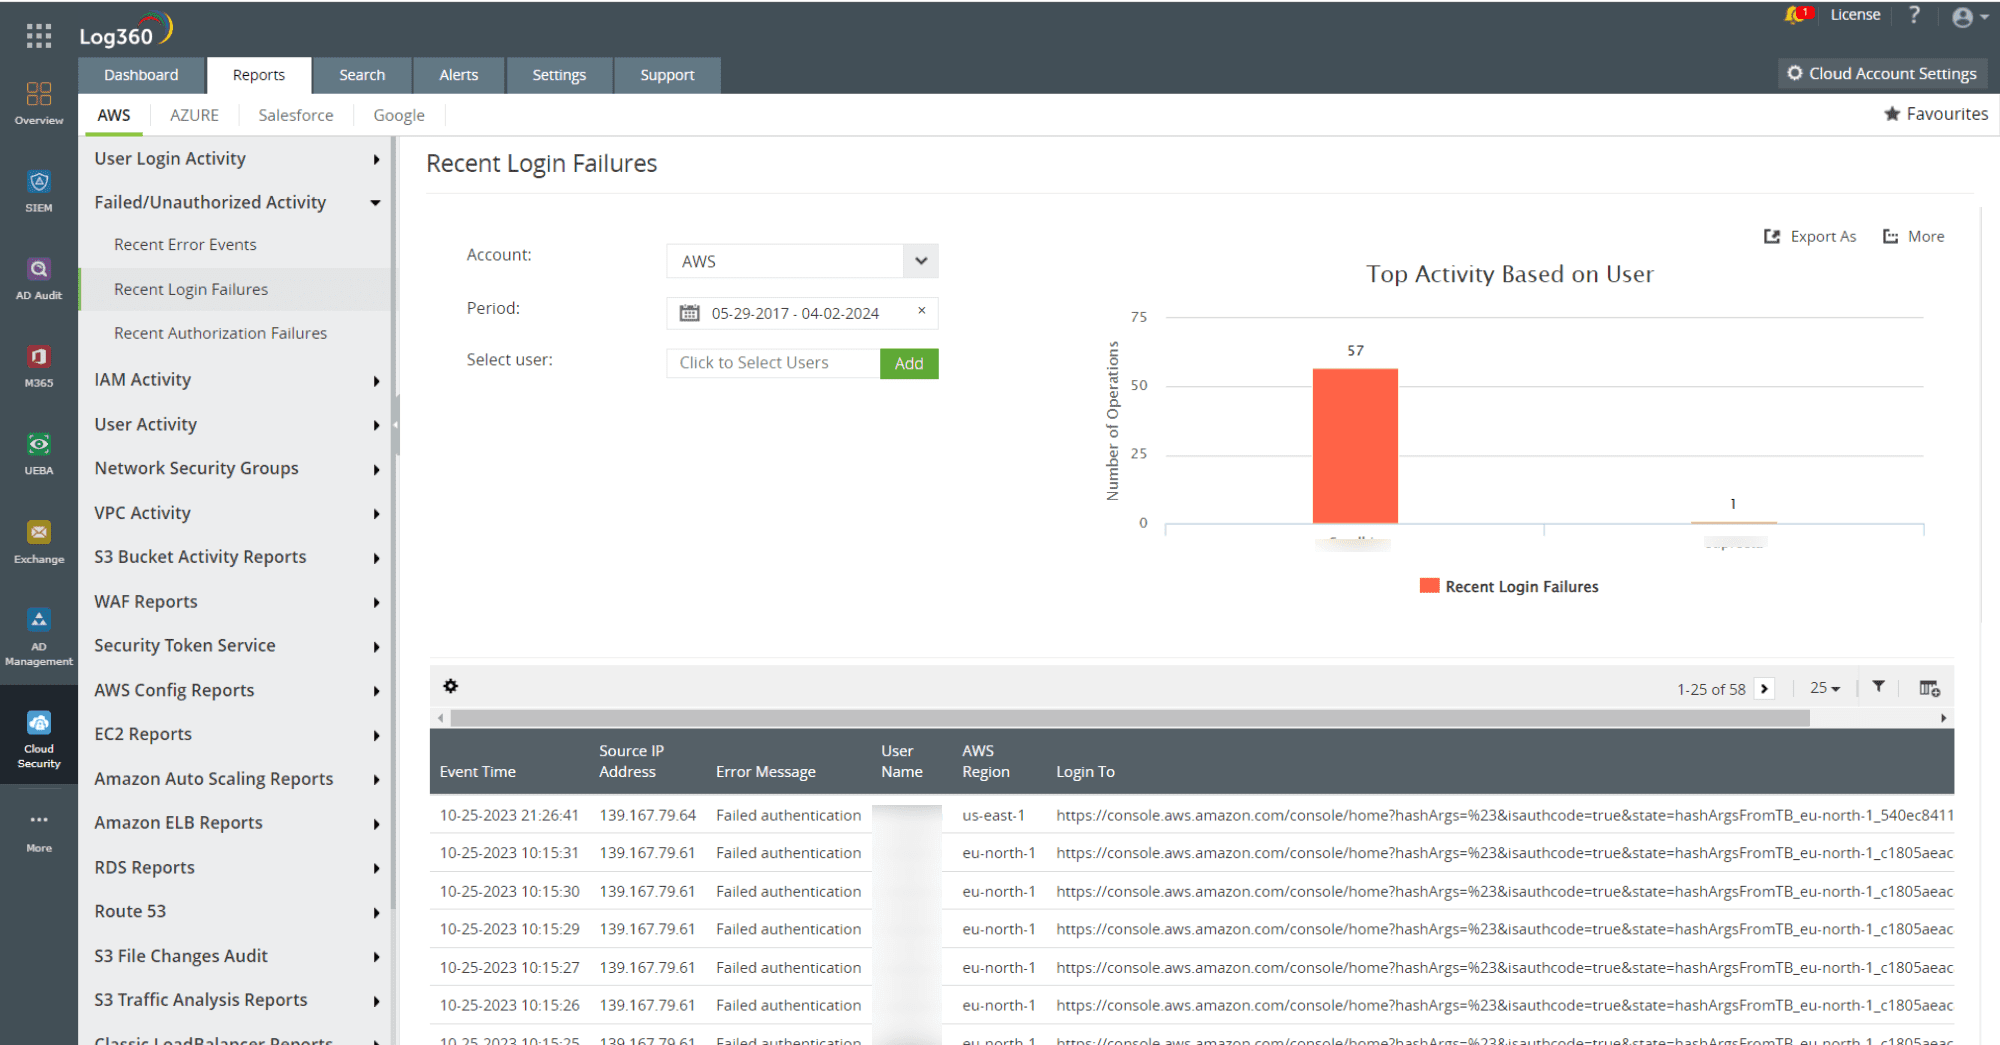 Leveraging AWS login failure report in Log360 to detect a Cloud Snooper attack